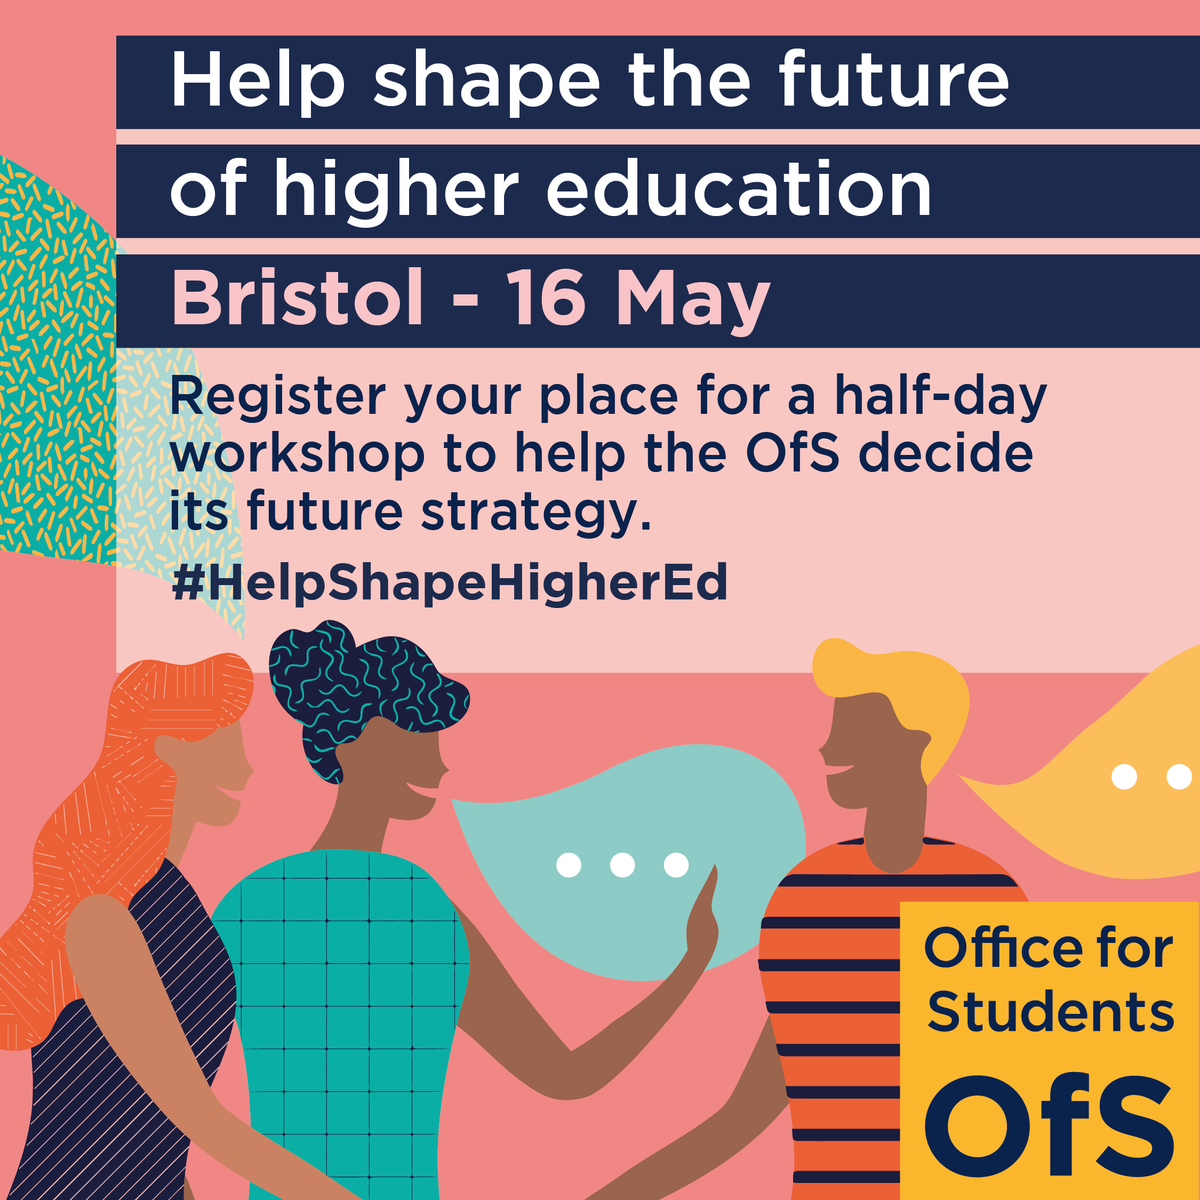 Have you signed up to #HelpShapeHigherEd? Our first event designed to give higher education students and staff the opportunity to share their views on the OfS’s future strategic direction takes place in Bristol on 16 May. Register your free place now: bit.ly/3UE44J0